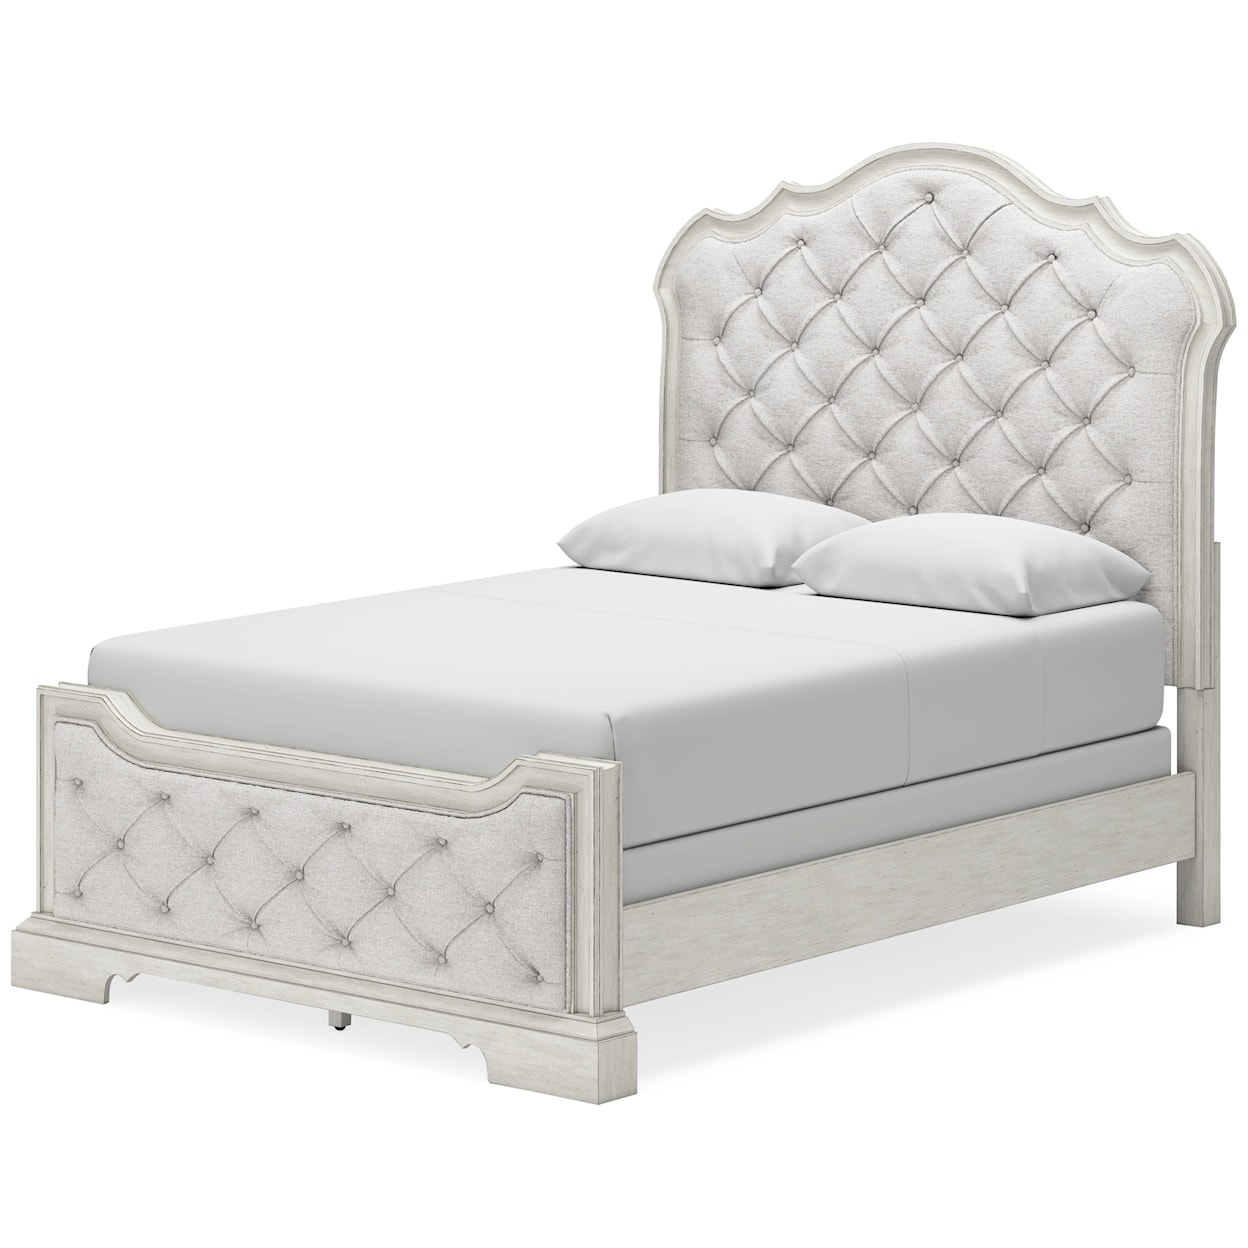 Signature Design by Ashley Furniture Arlendyne Queen Bed